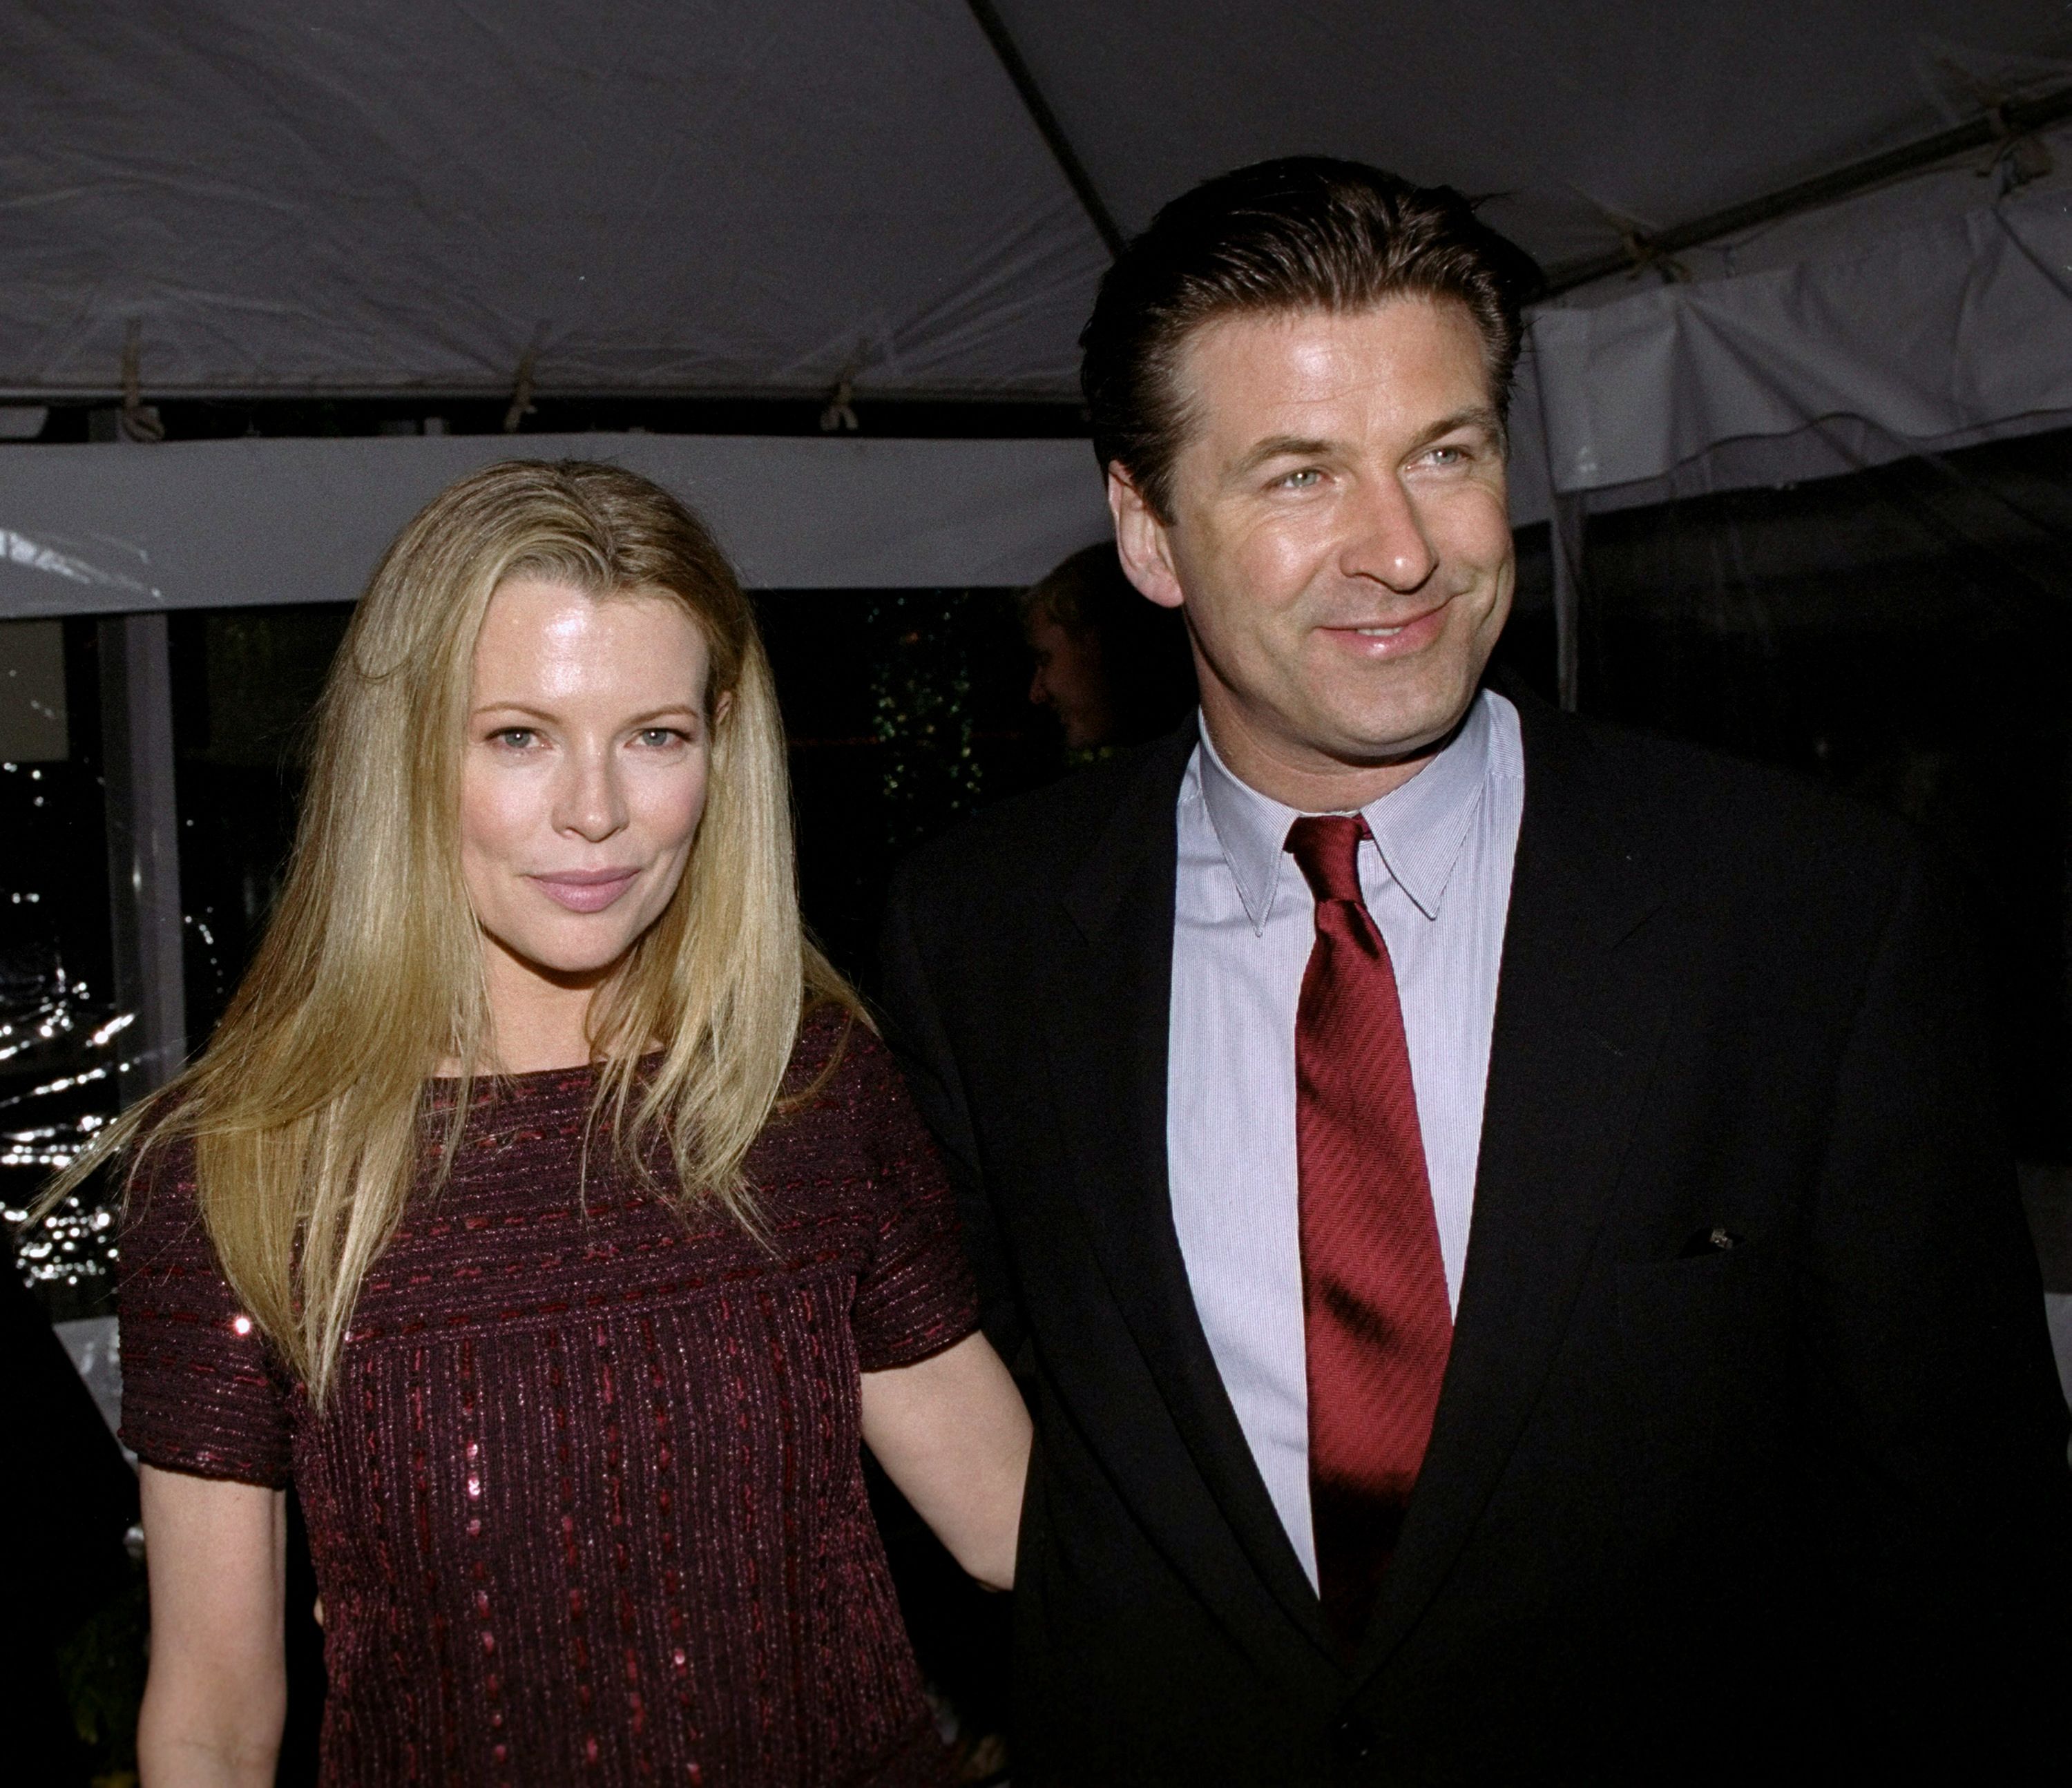 Kim Basinger and Alec Baldwin at the premiere party for the movie "I Dreamed Of Africa" held at t the Tavern On The Green on April 19, 2000 | Photo: Richard Corkery/NY Daily News Archive/Getty Images